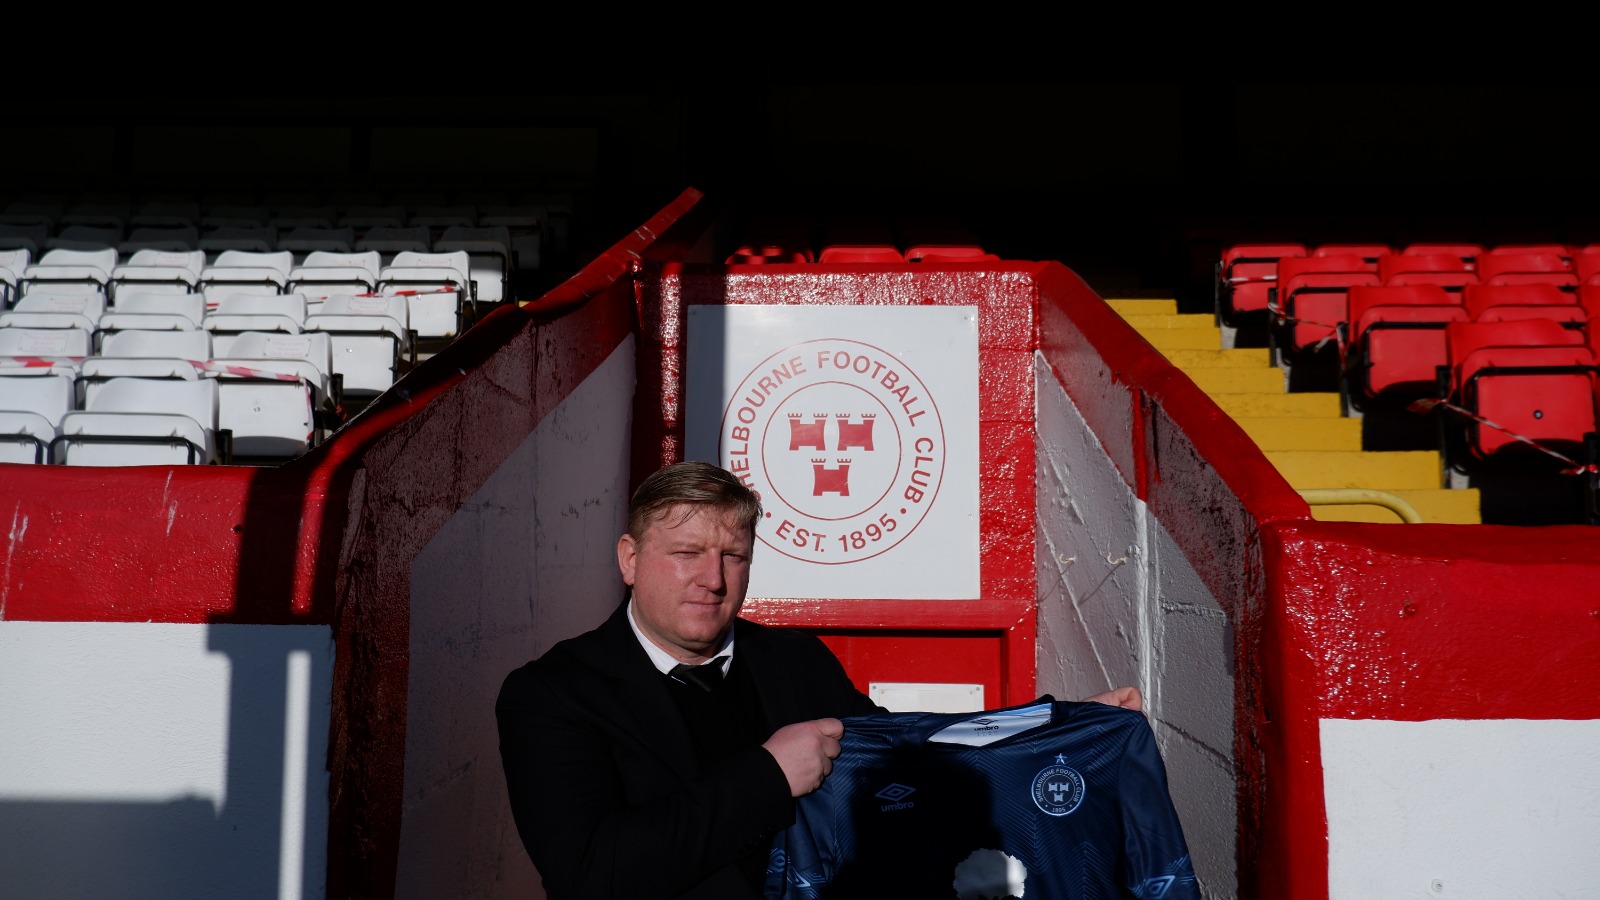 Shelbourne appoints Alan Caffrey as Sporting and Technical Director